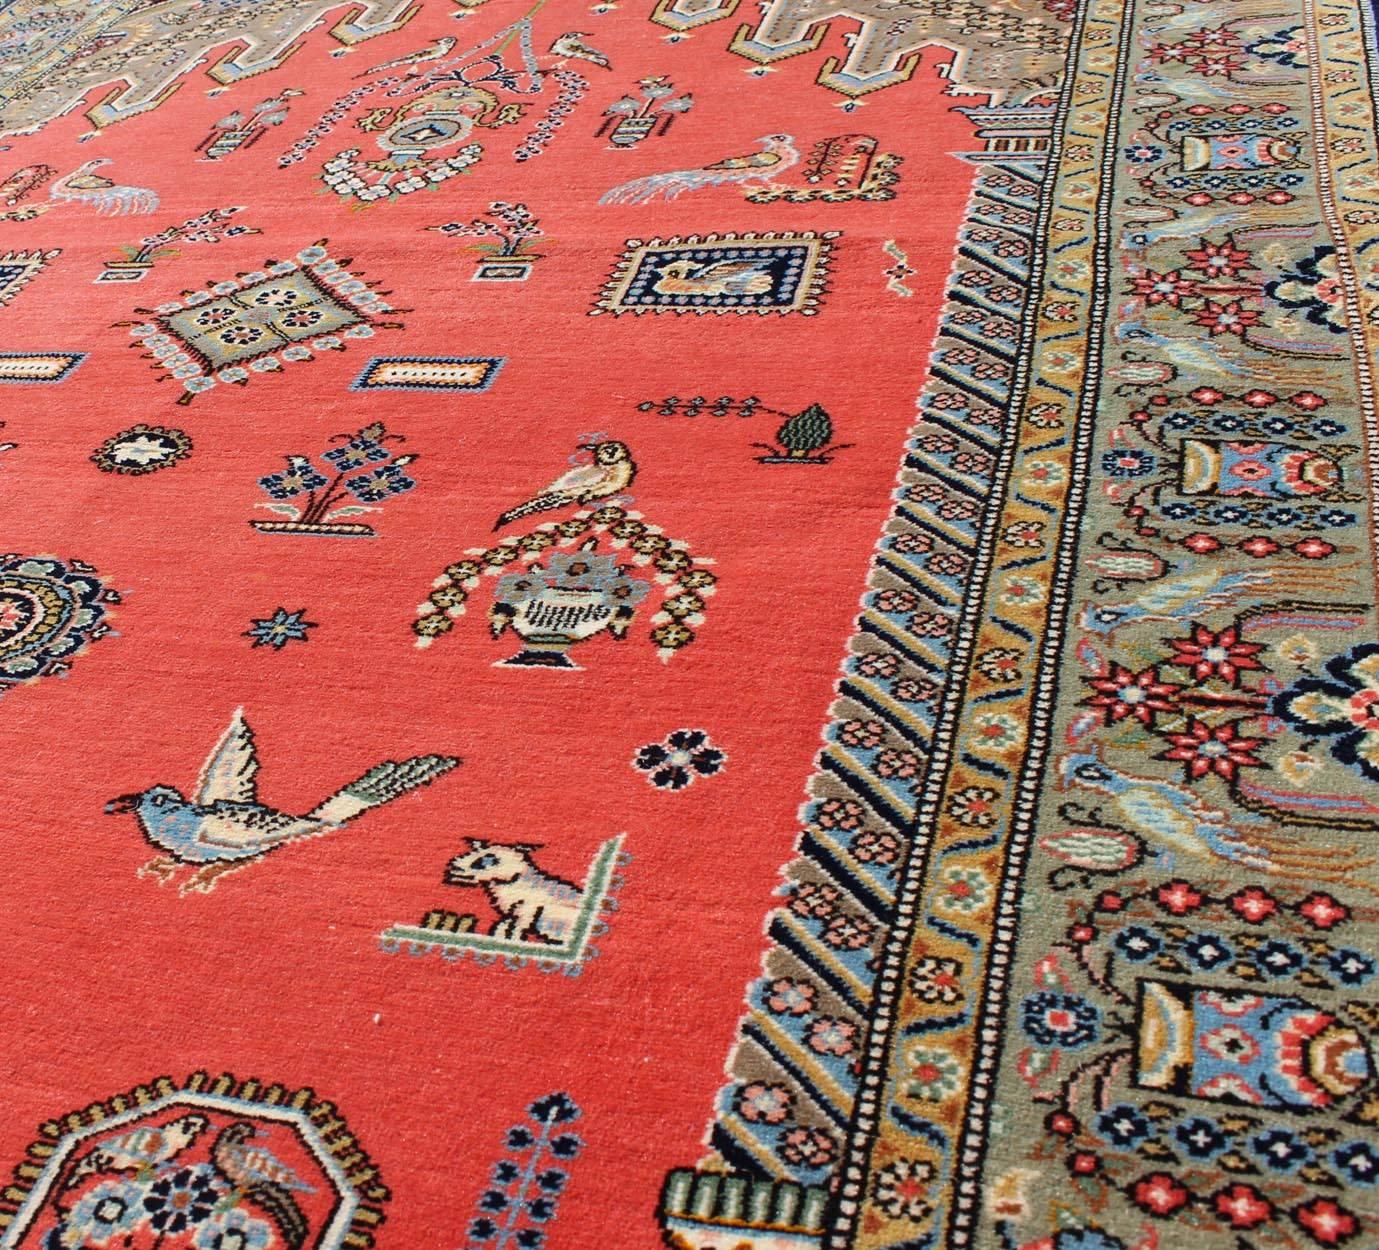 Vintage Fine Persian Qum Prayer Rug With Soft Red Field in Mihrab Design In Excellent Condition For Sale In Atlanta, GA